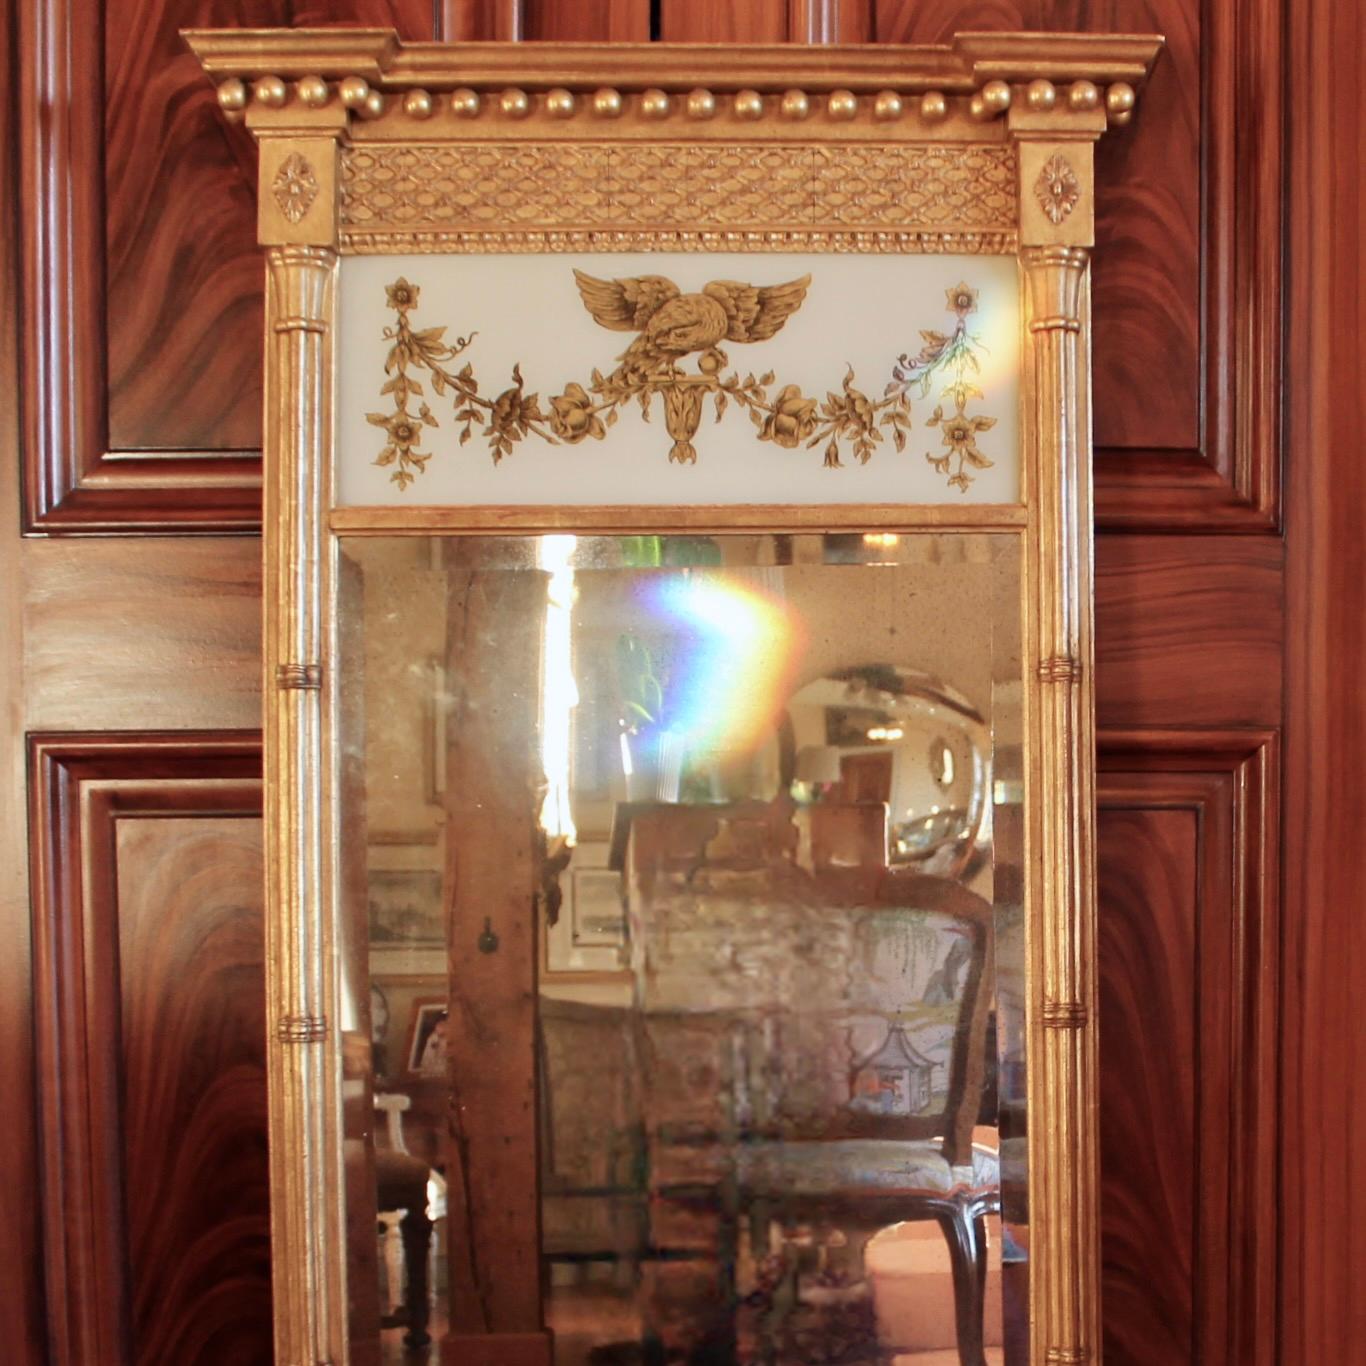 A large and handsome American Federal Style mirror of very good quality in the Federal style, likely made in Italy in the second half of the 20th century. Clusters of colonnettes at the sides support the pediment. An eglomisé panel featuring a